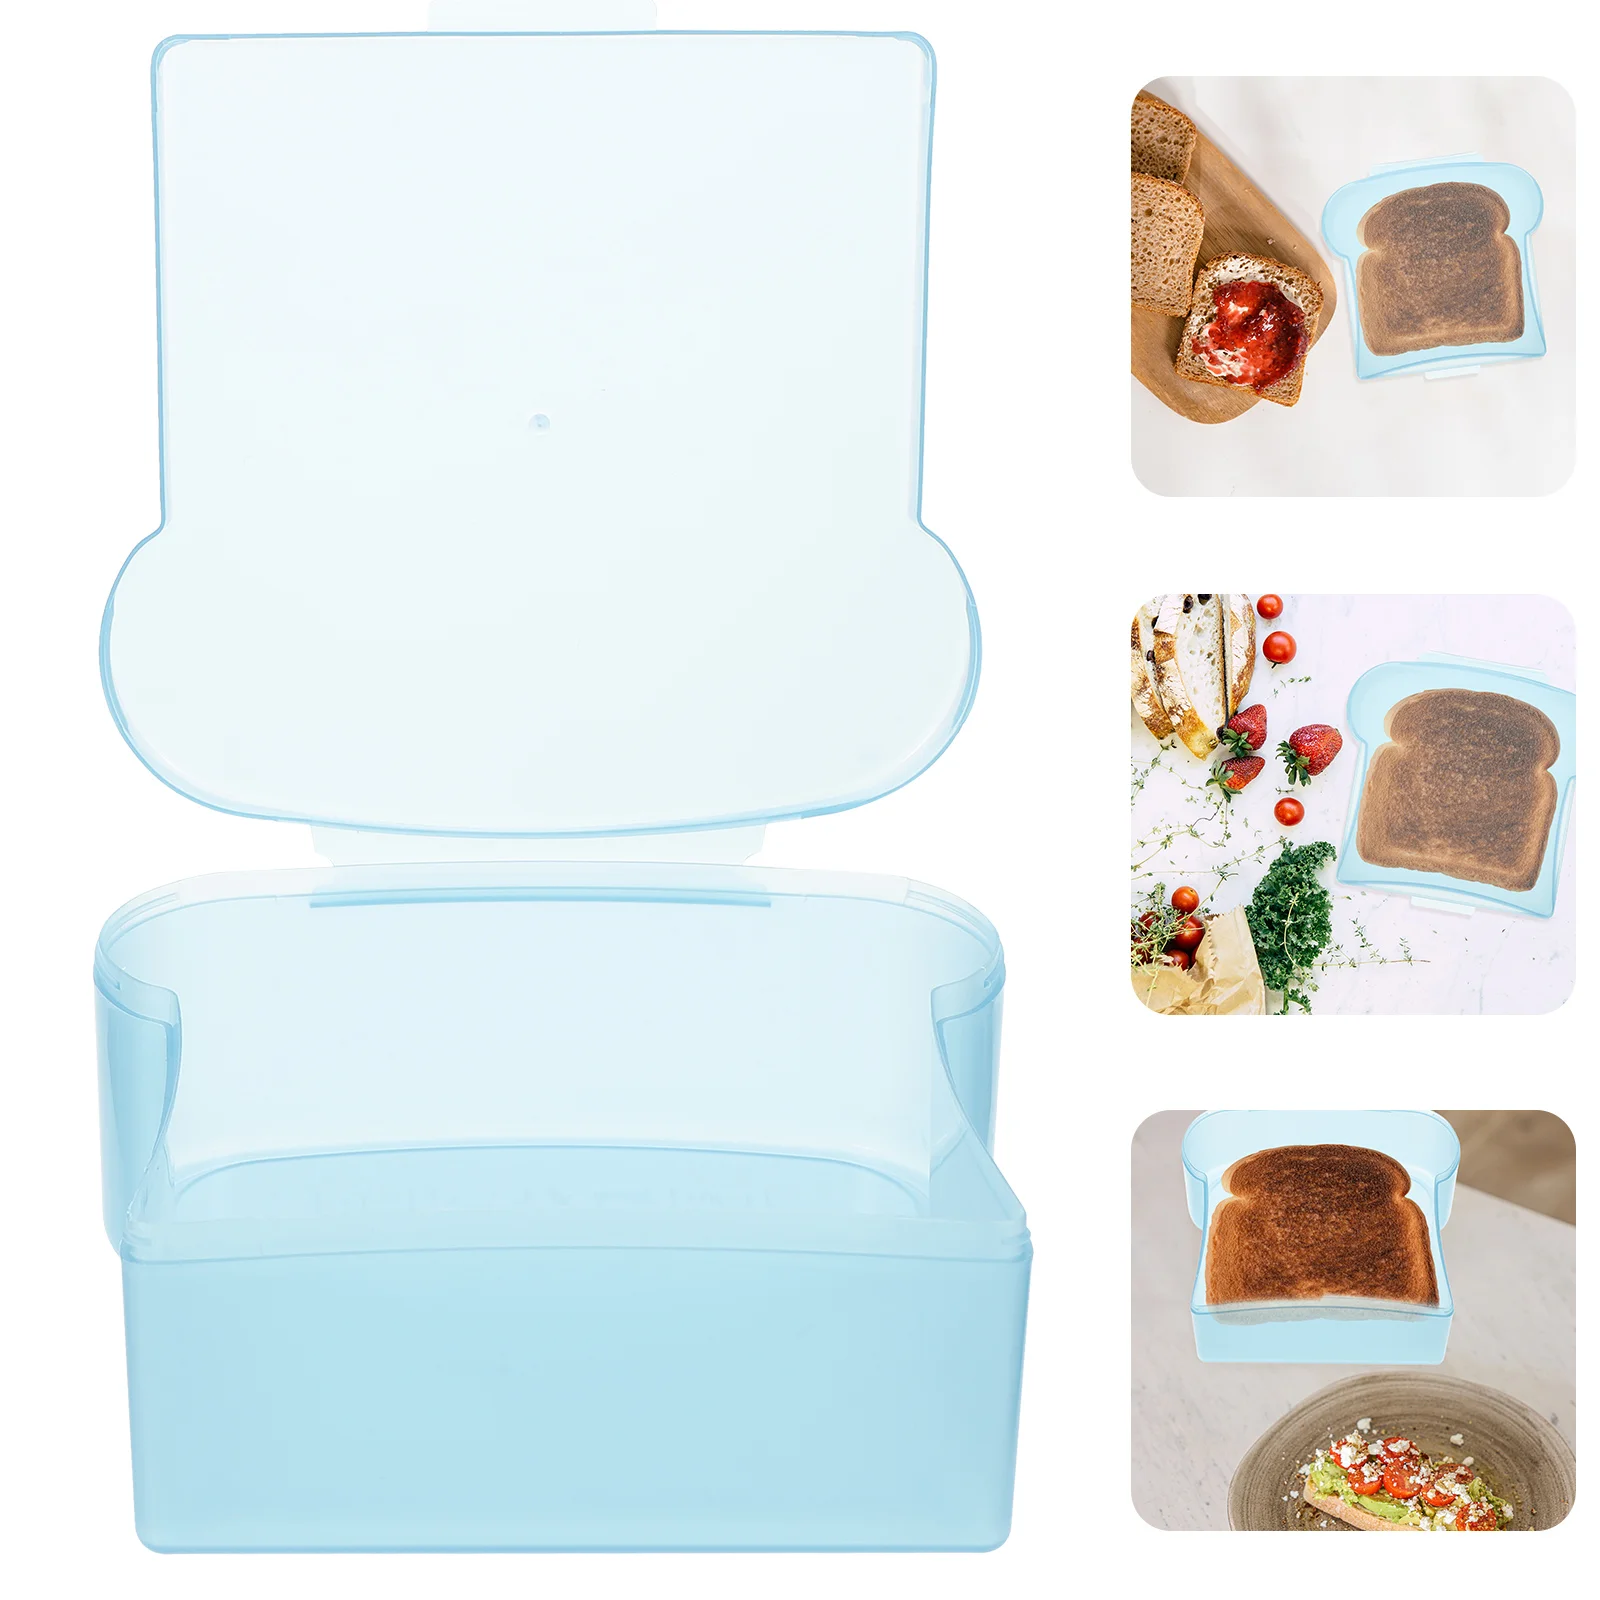 

Sandwich Box Refrigerator Stand Kids Food Holder Bento Packing School Office Lunch Plastic Pp Pupils Fruit Portable Container